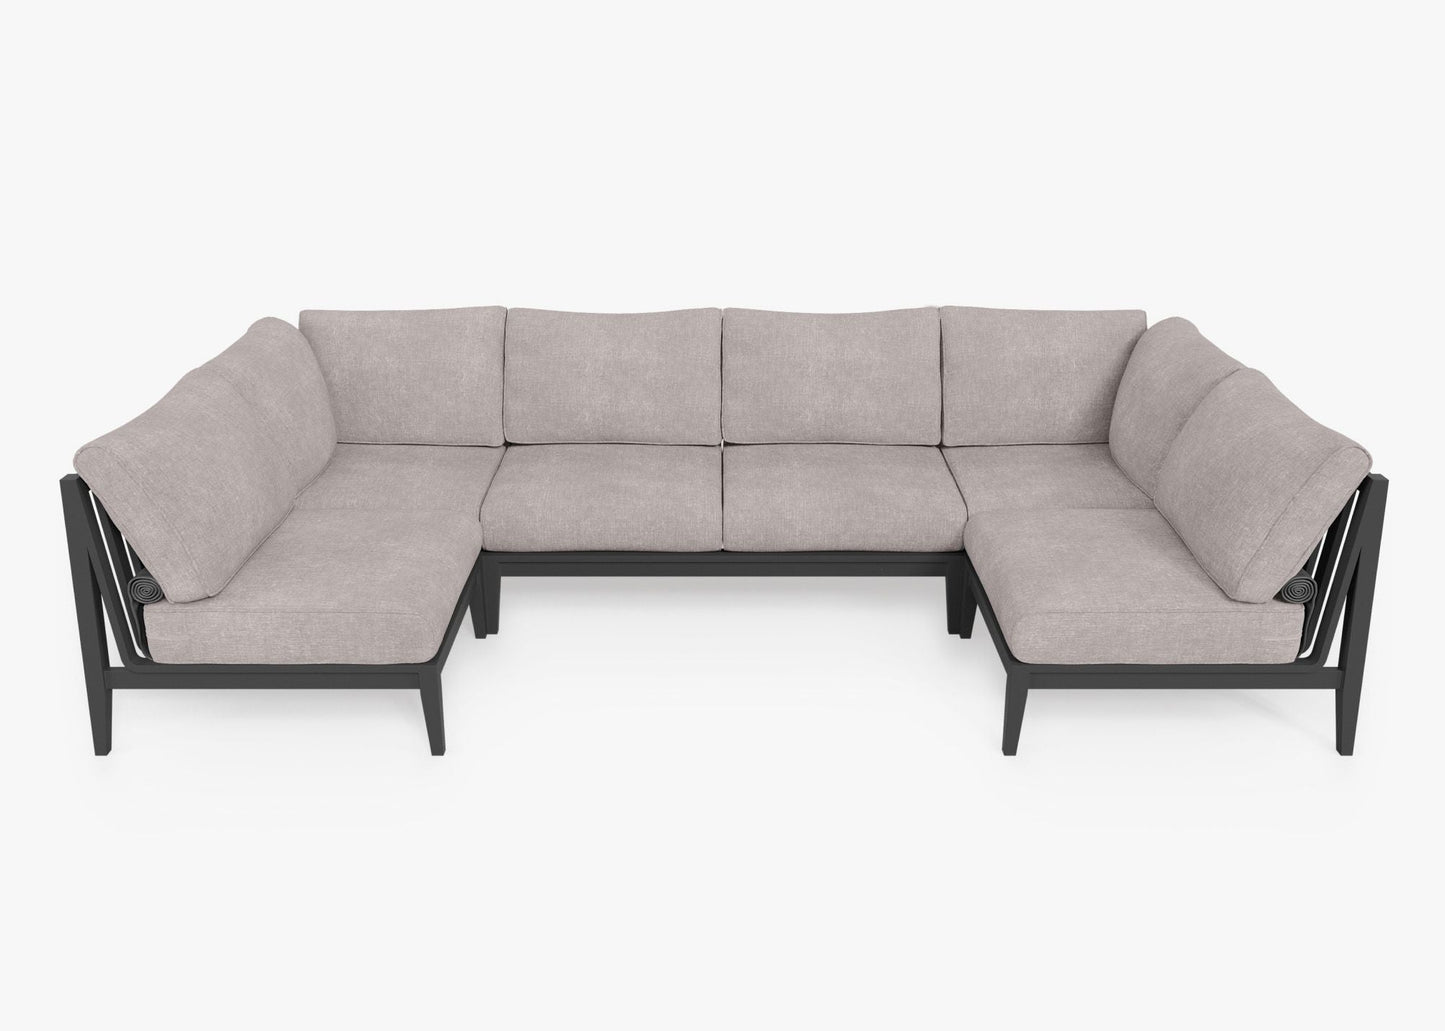 Live Outer 127" x 64" Charcoal Aluminum Outdoor U Sectional 6-Seat With Sandstone Gray Cushion